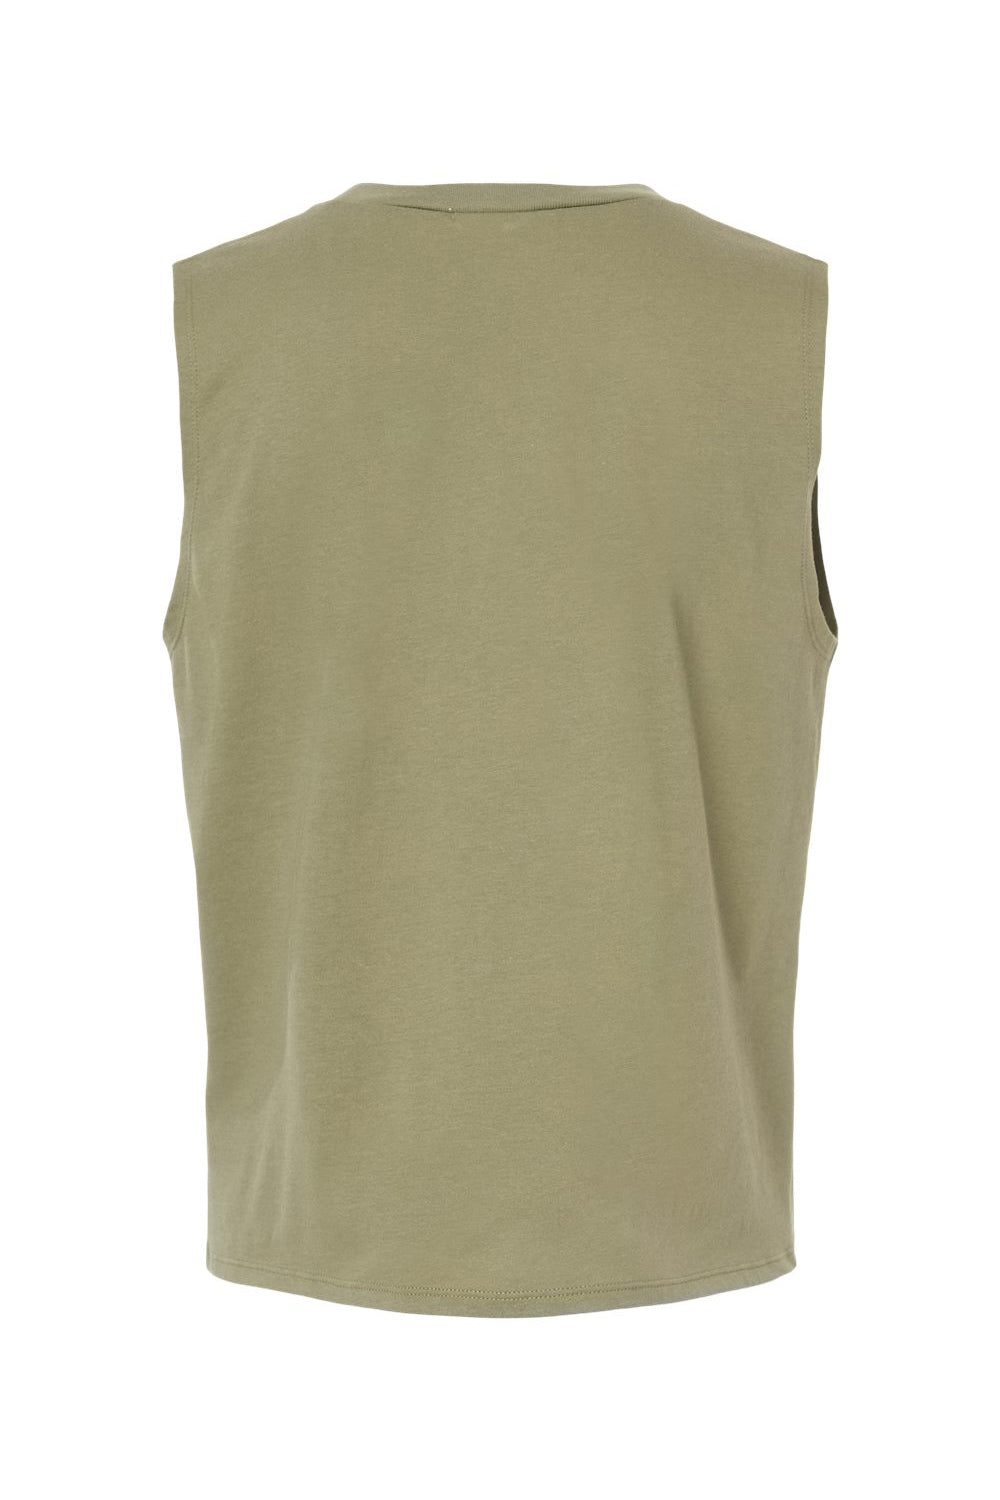 Alternative 1174 Womens Go To Crop Muscle Tank Top Military Green Flat Back